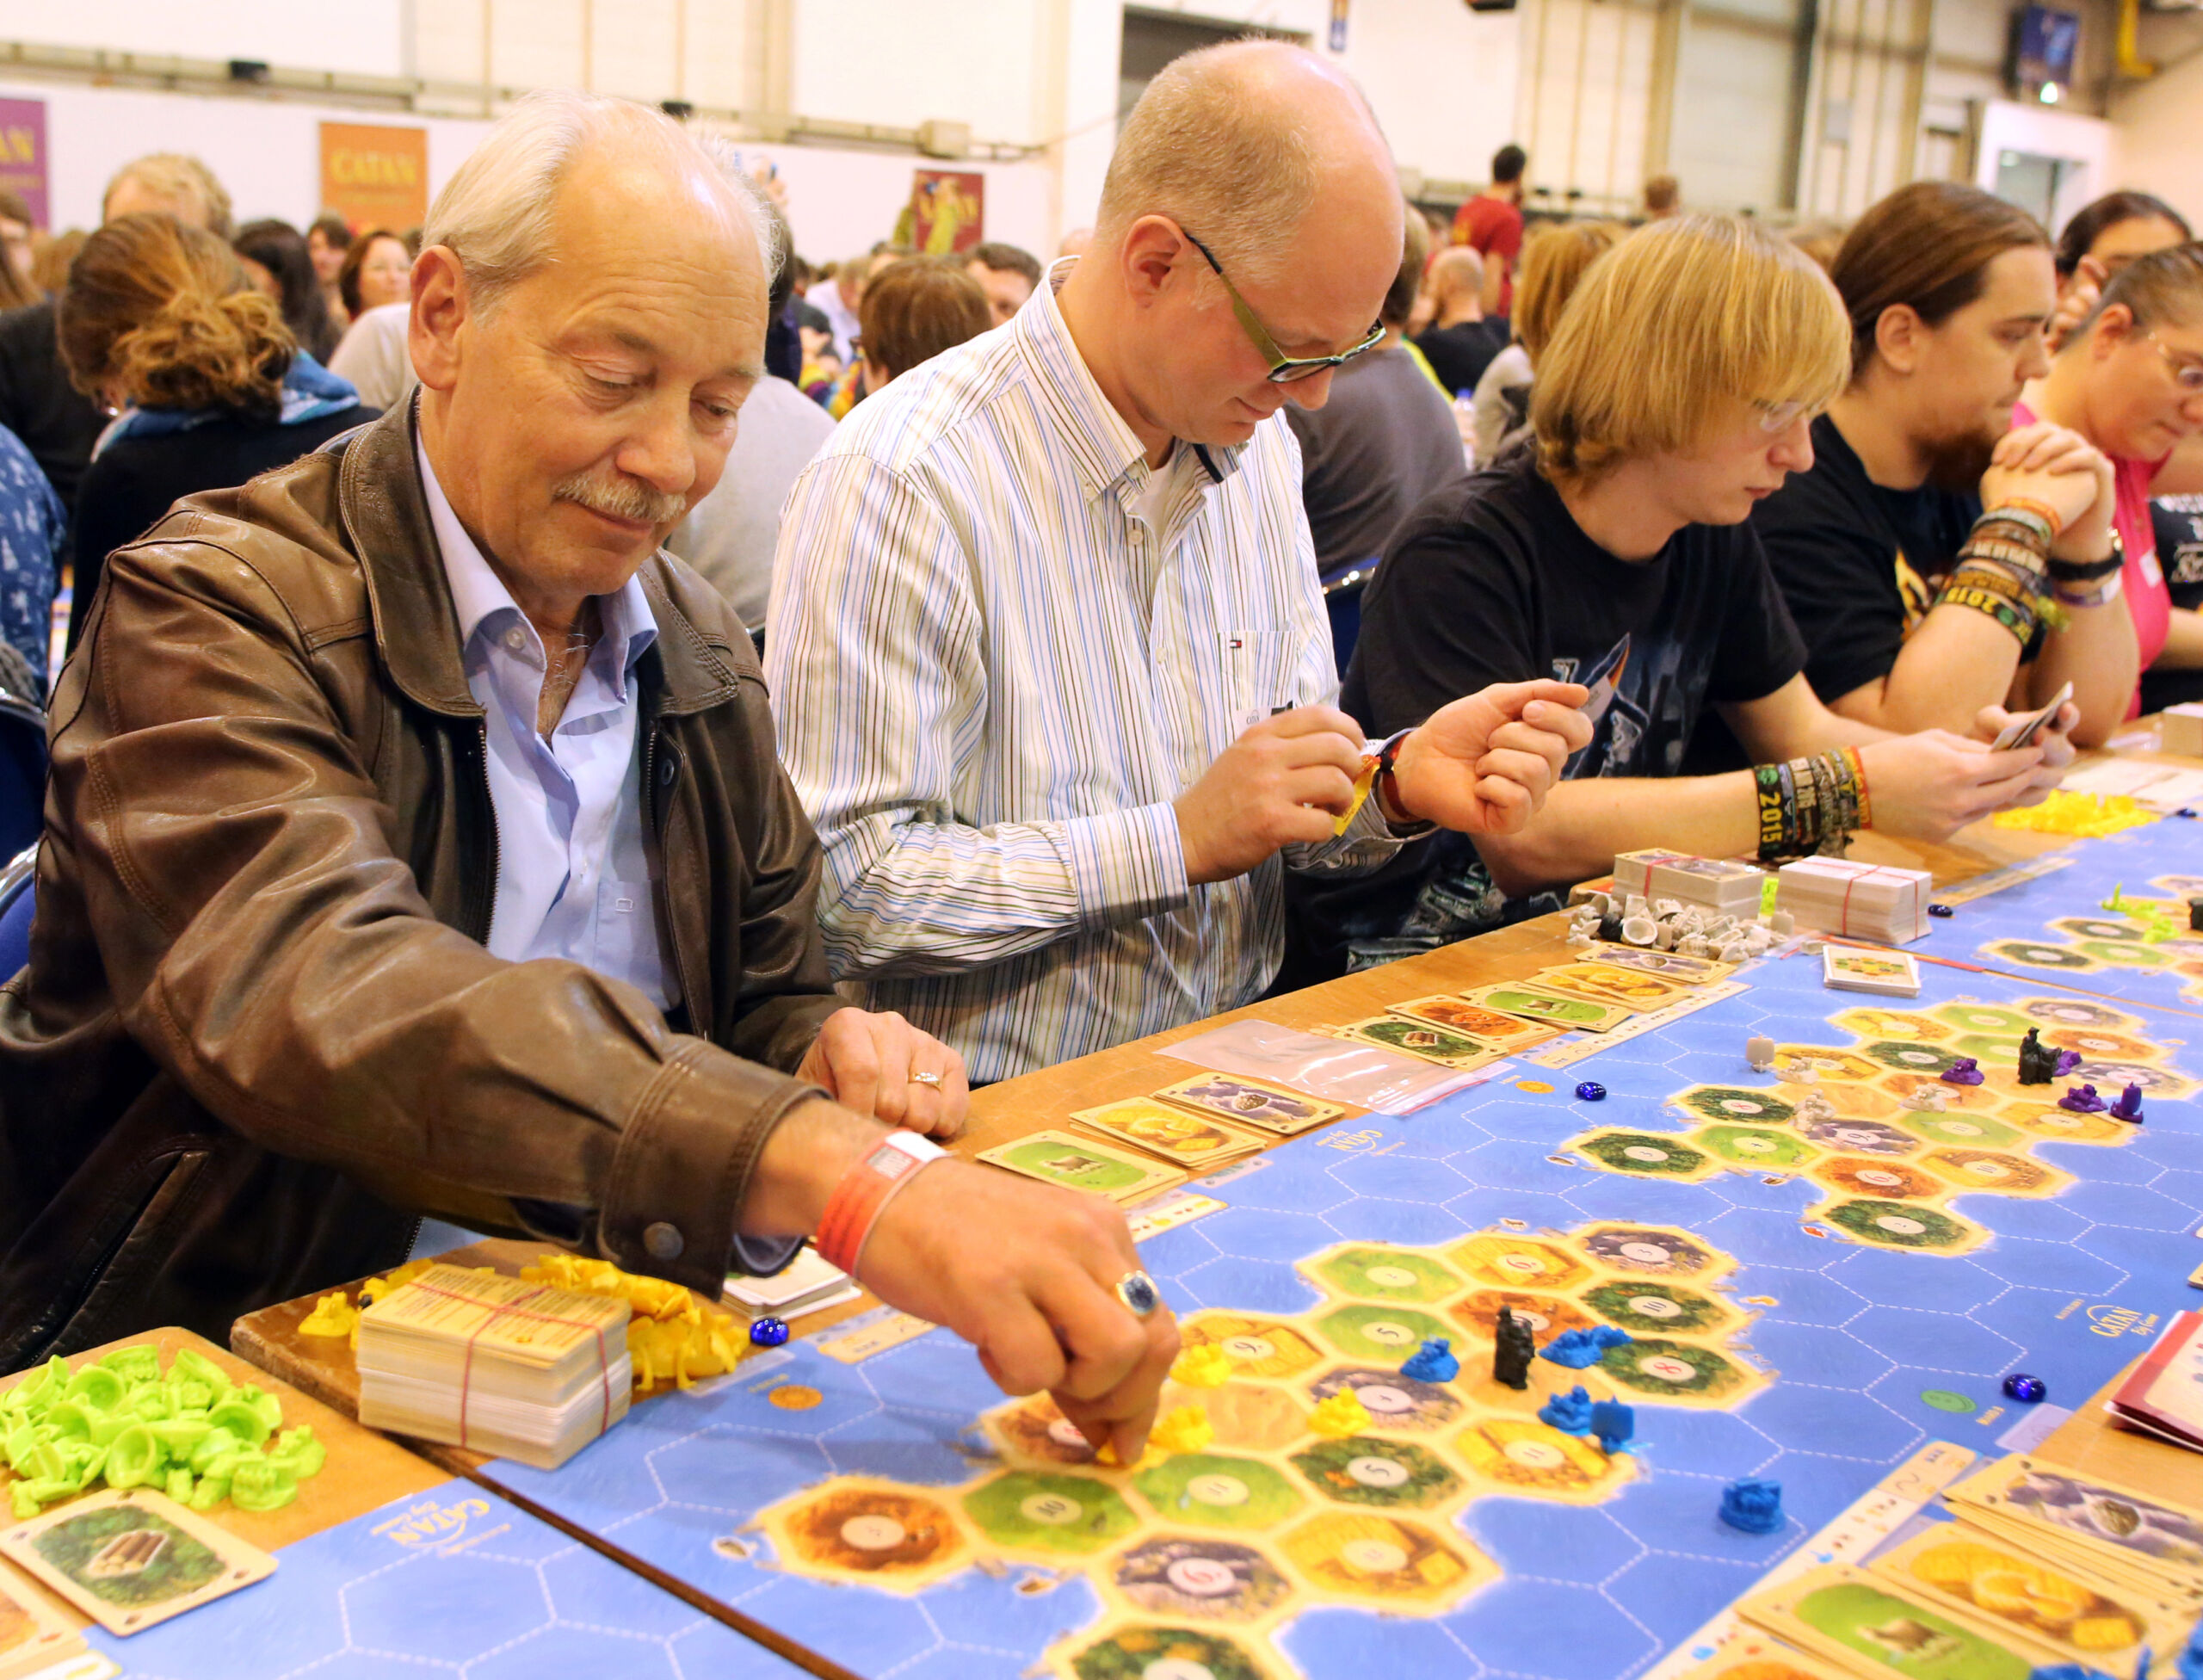 World's biggest board game? Catan Studio won't 'settle' for less